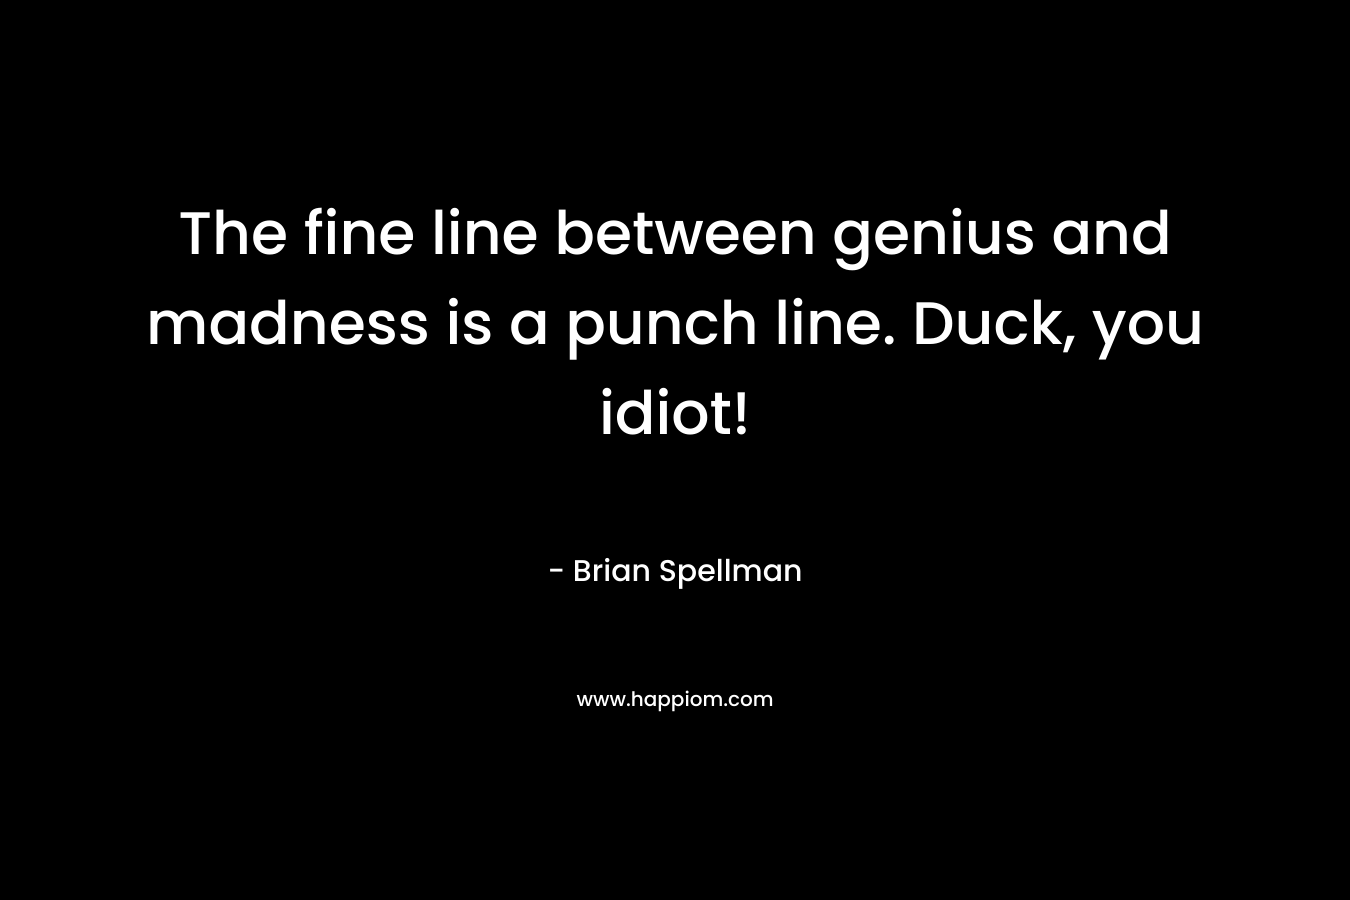 The fine line between genius and madness is a punch line. Duck, you idiot! – Brian Spellman